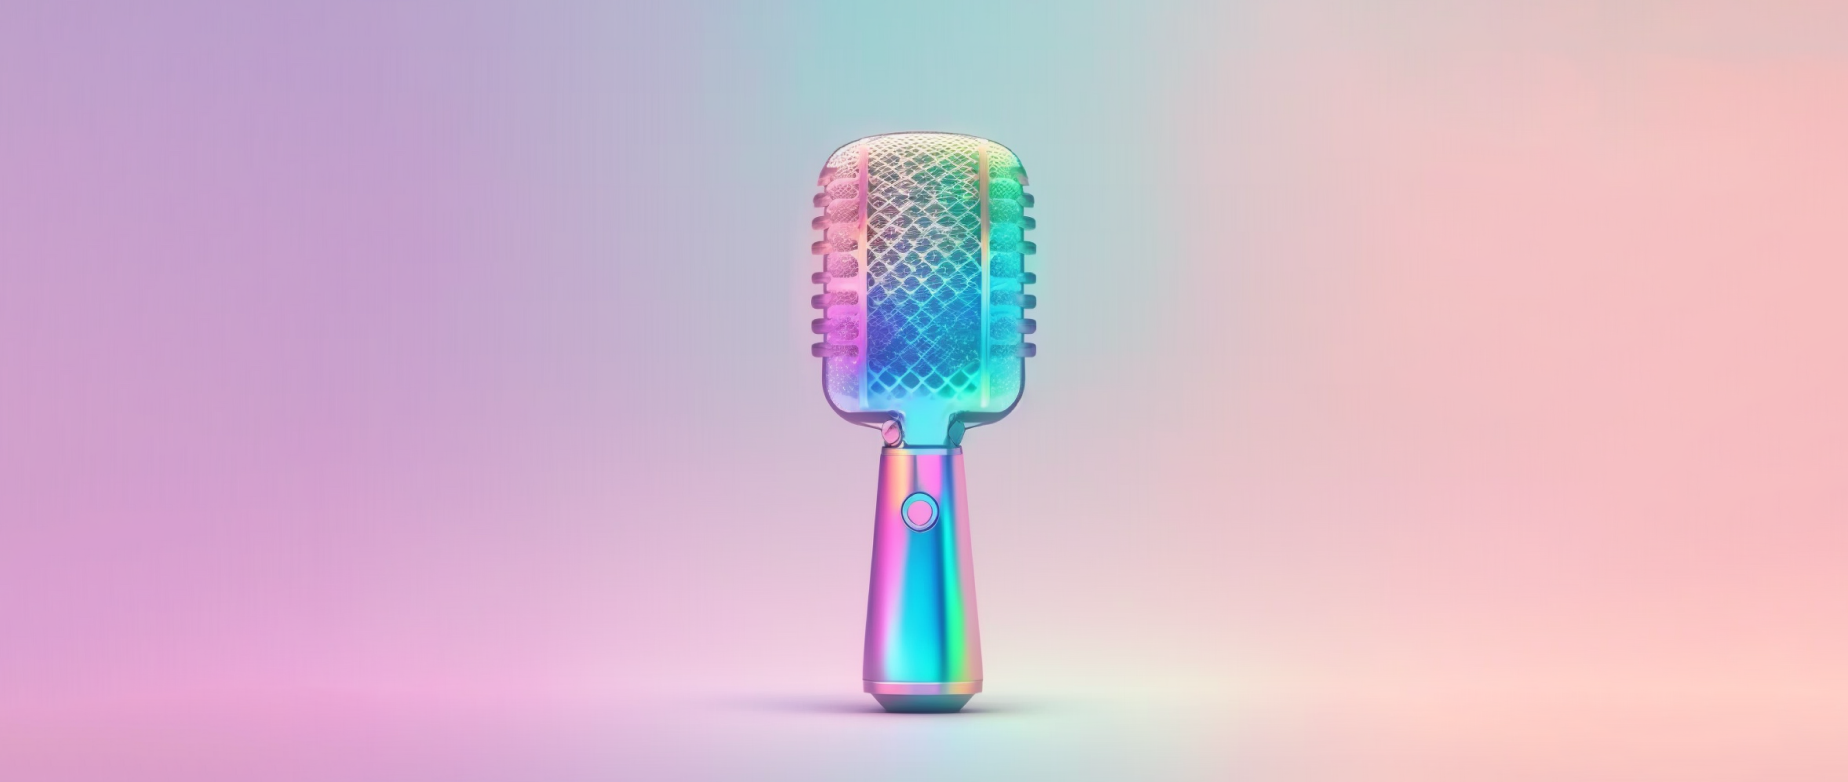 shiny old-fashioned microphone on a pink ombre background